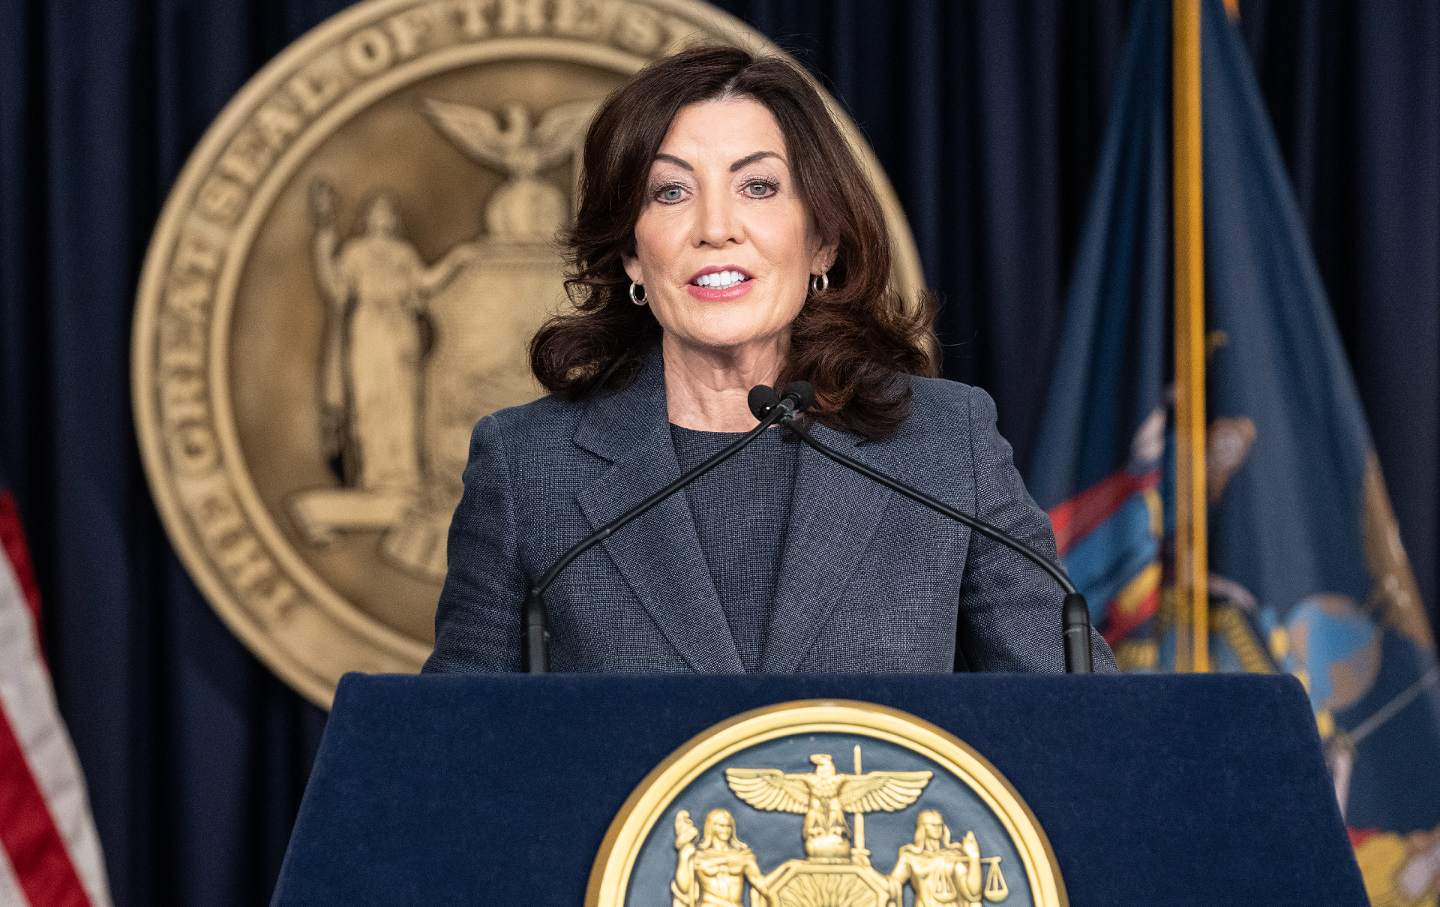 Kathy Hochul speaks at a press briefing.